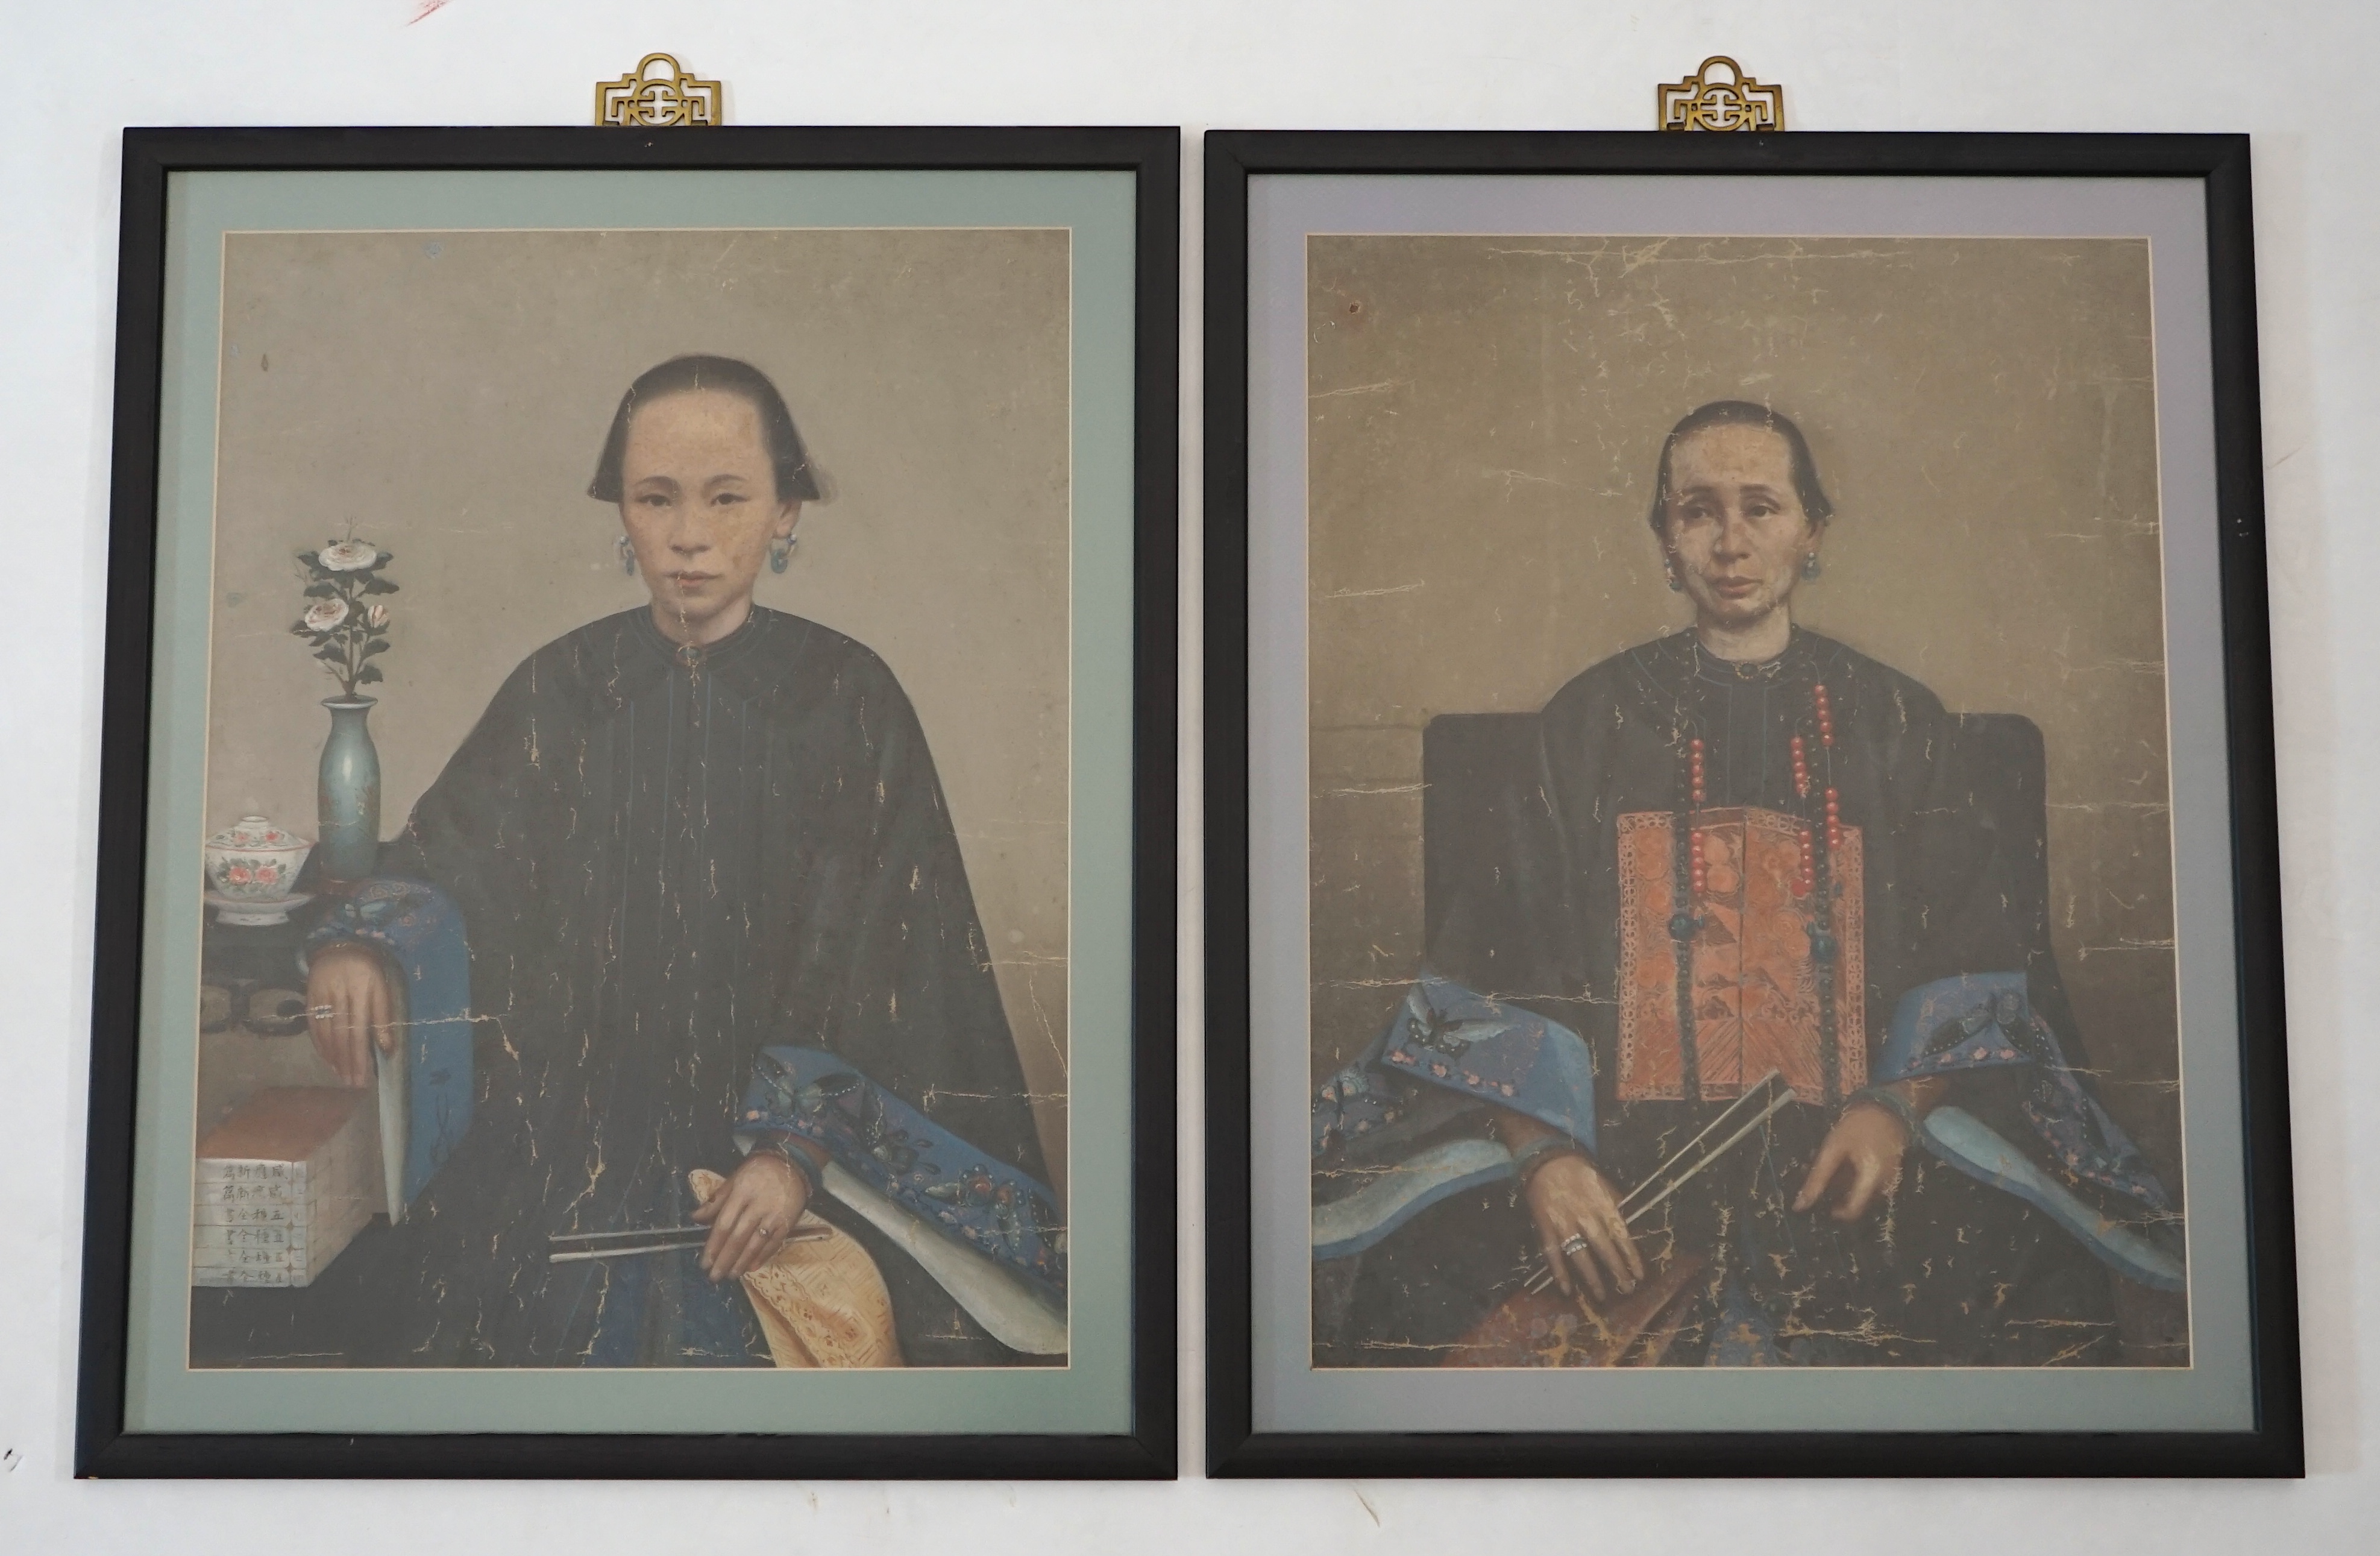 China Trade, late Qing dynasty, two portraits of Qing ladies, oil on canvas, each 63 x 47cm, later framed and glazed. Condition - poor to fair